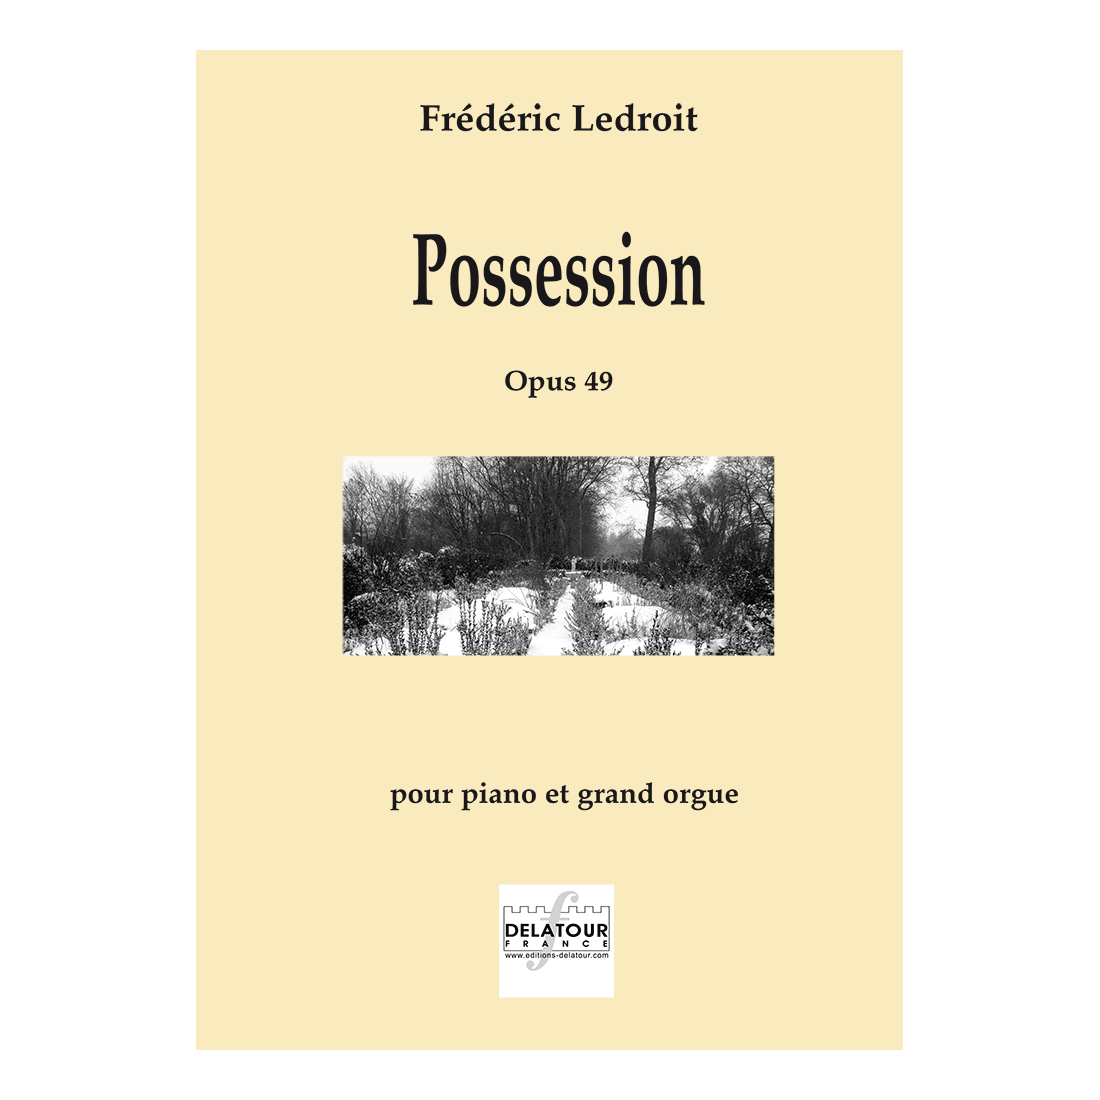 Possession for piano and great organ